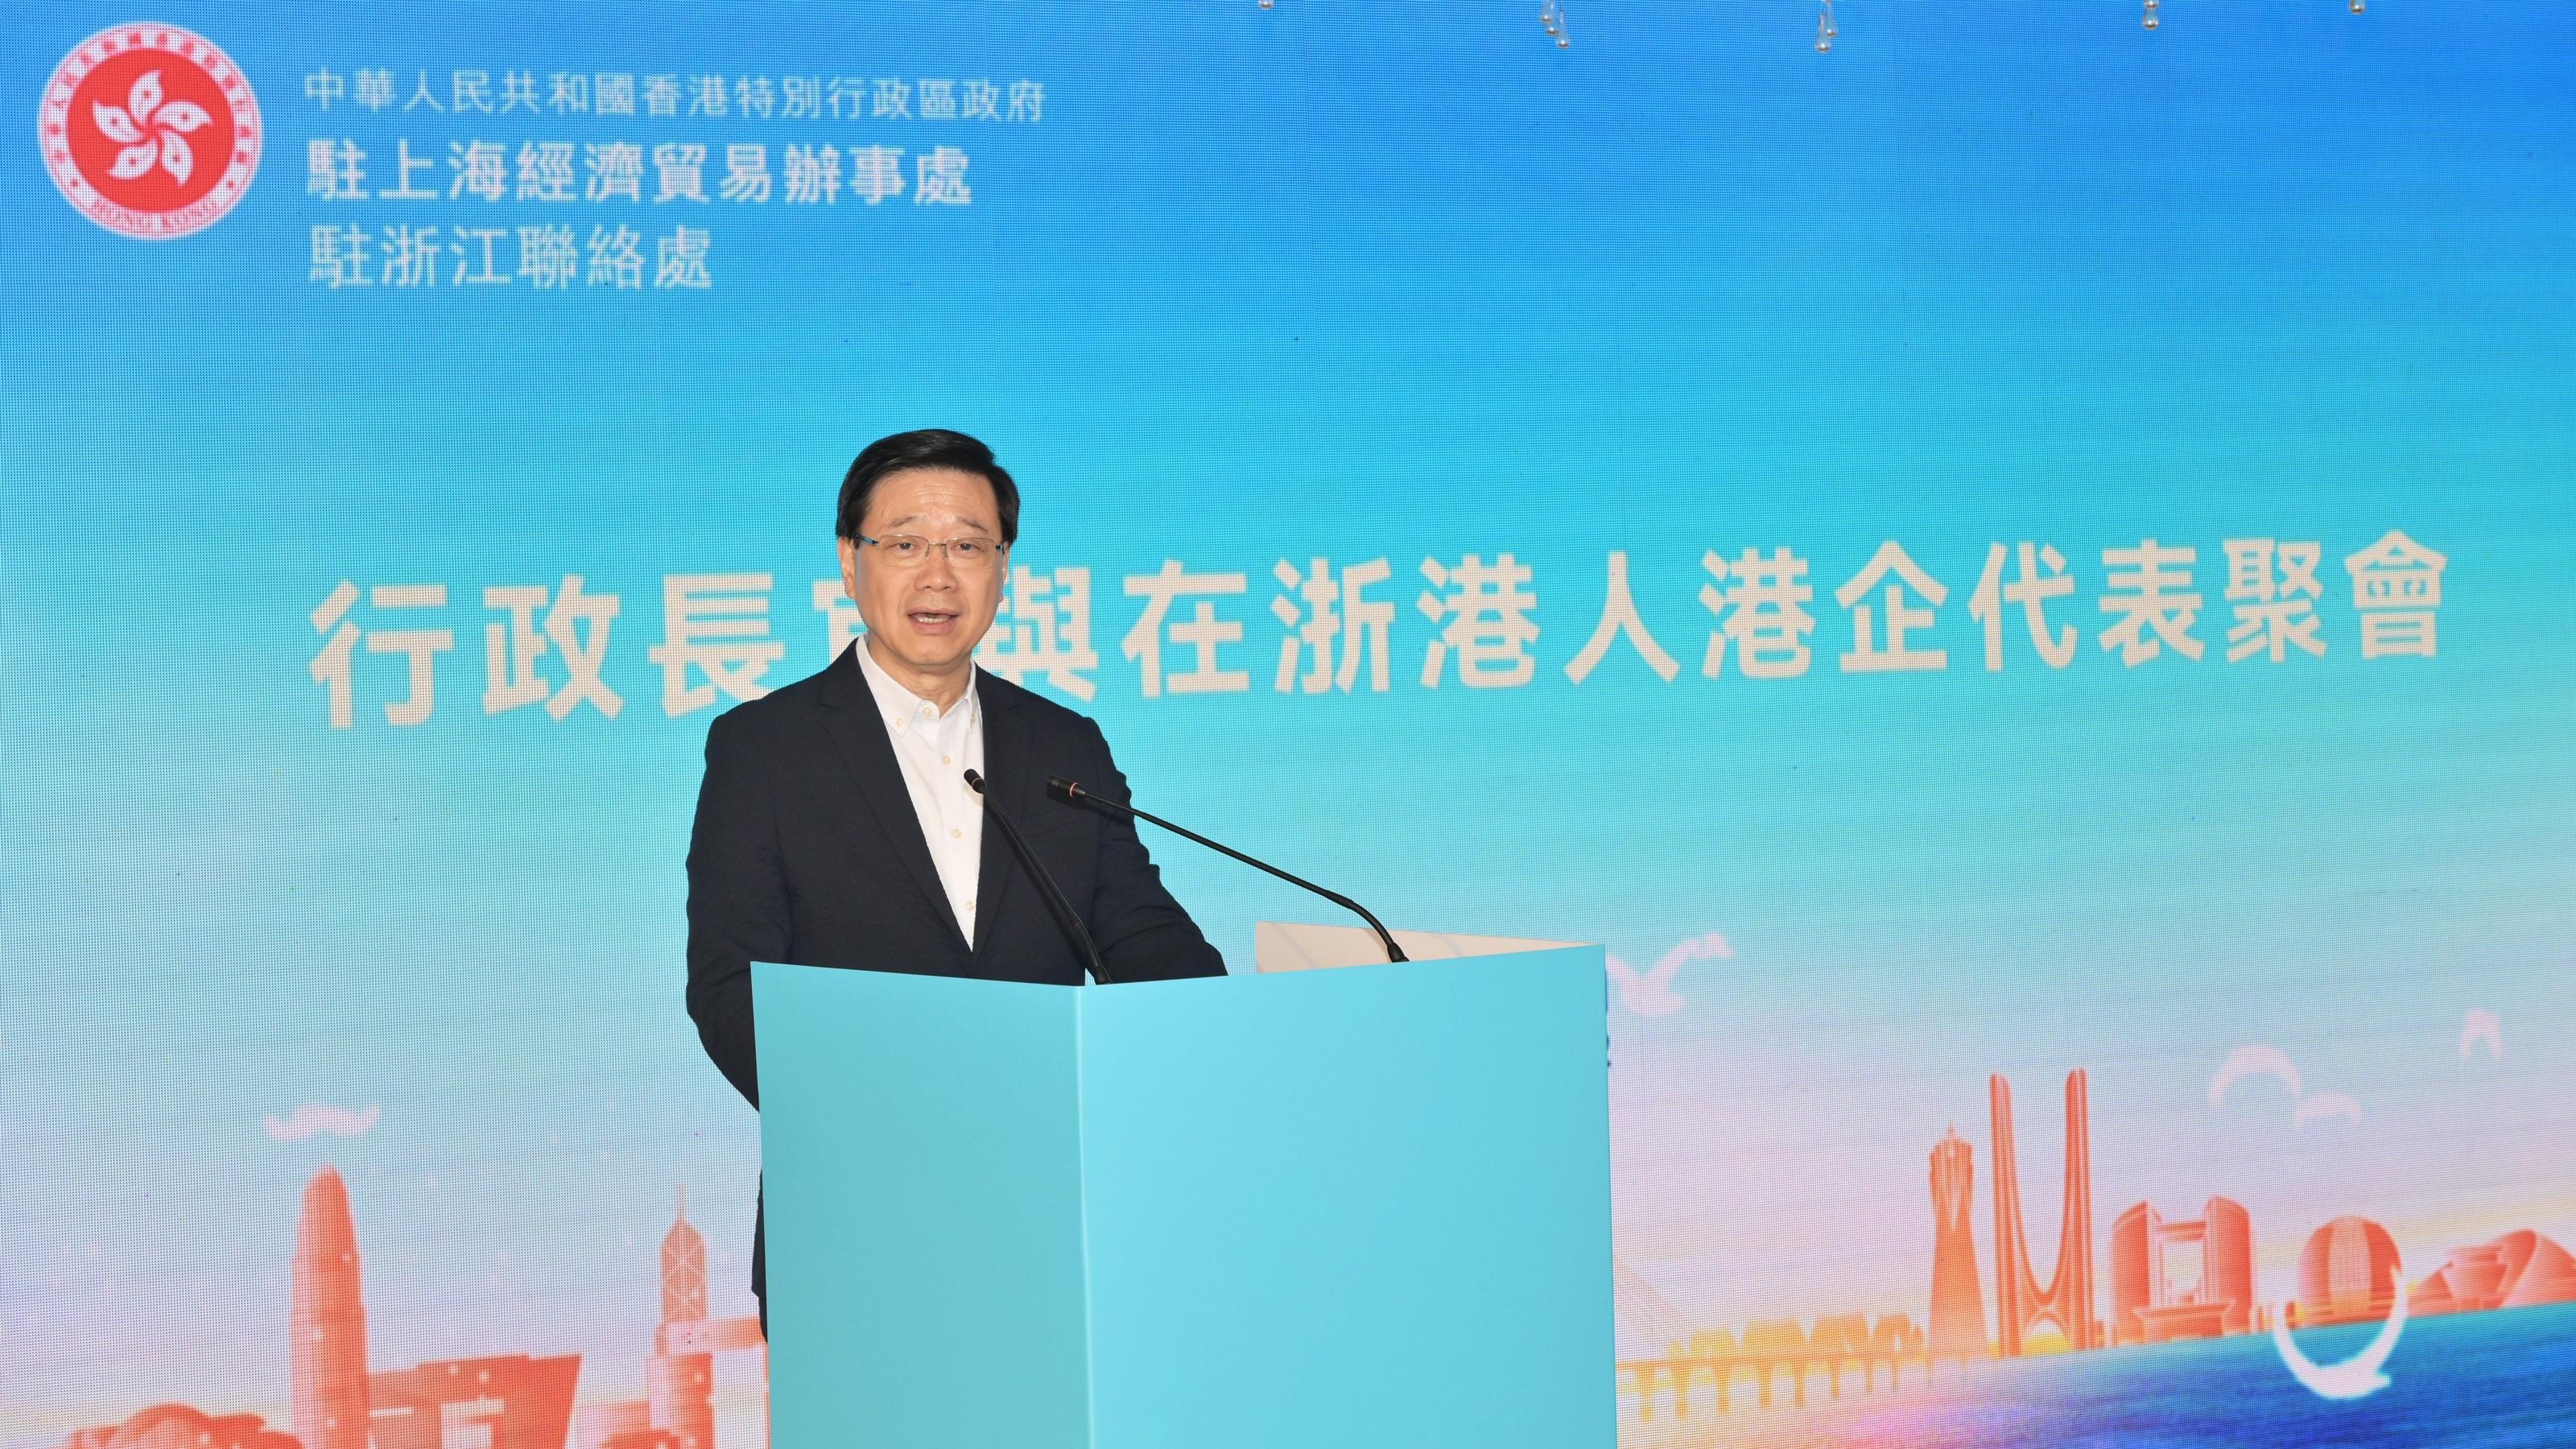 The Chief Executive, Mr John Lee, led a delegation of the Hong Kong Special Administrative Region Government to attend the opening ceremony of the 19th Asian Games Hangzhou today (September 22). Photo shows Mr Lee speaking at the meeting with the representatives of Hong Kong enterprises in Zhejiang.